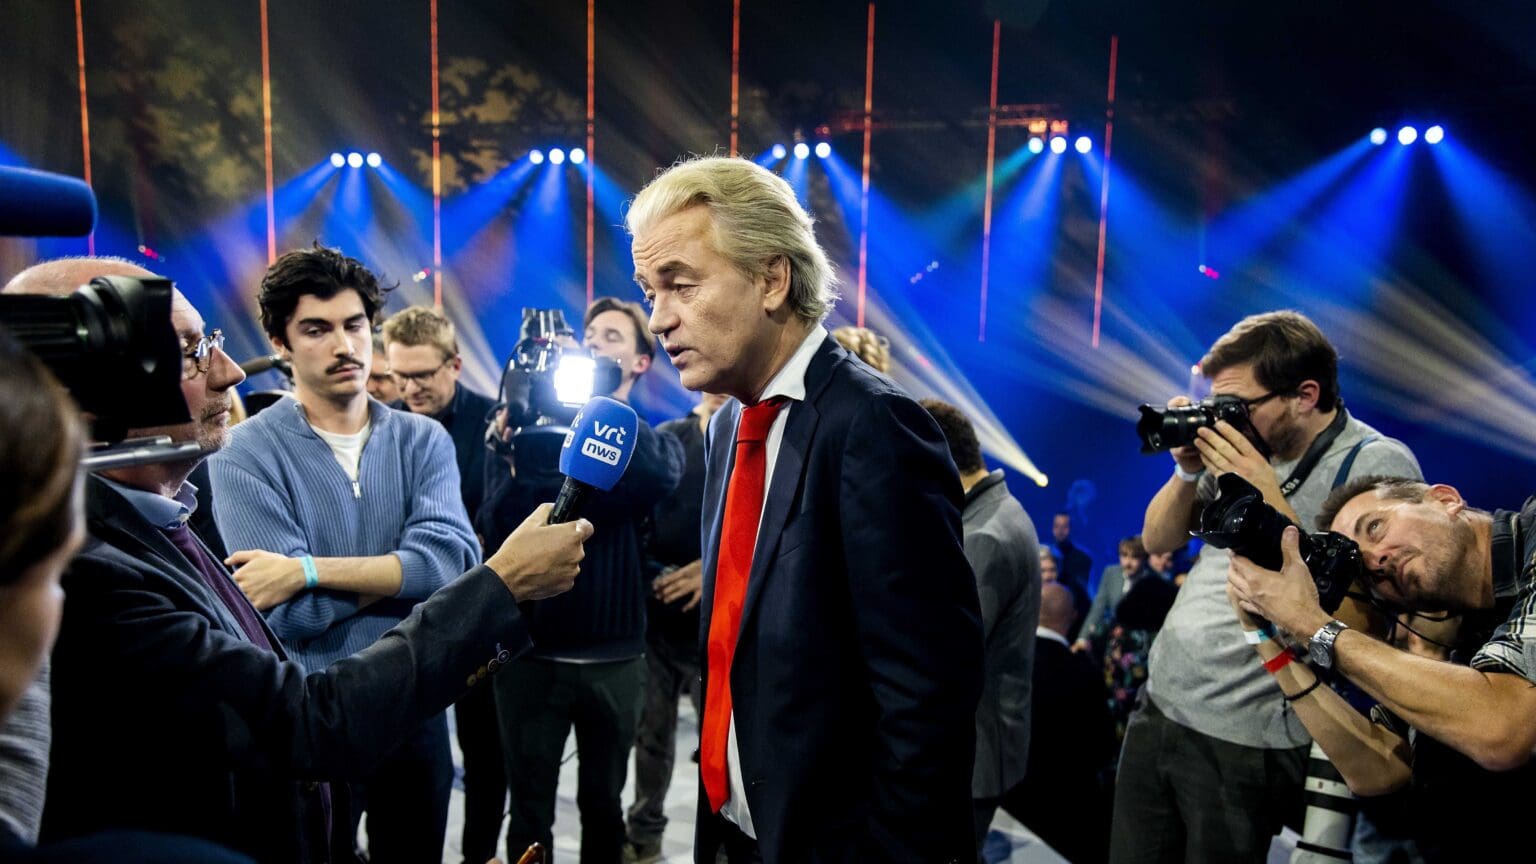 Geert Wilders, Prospective Prime Minister of the Netherlands, Coming to CPAC Hungary